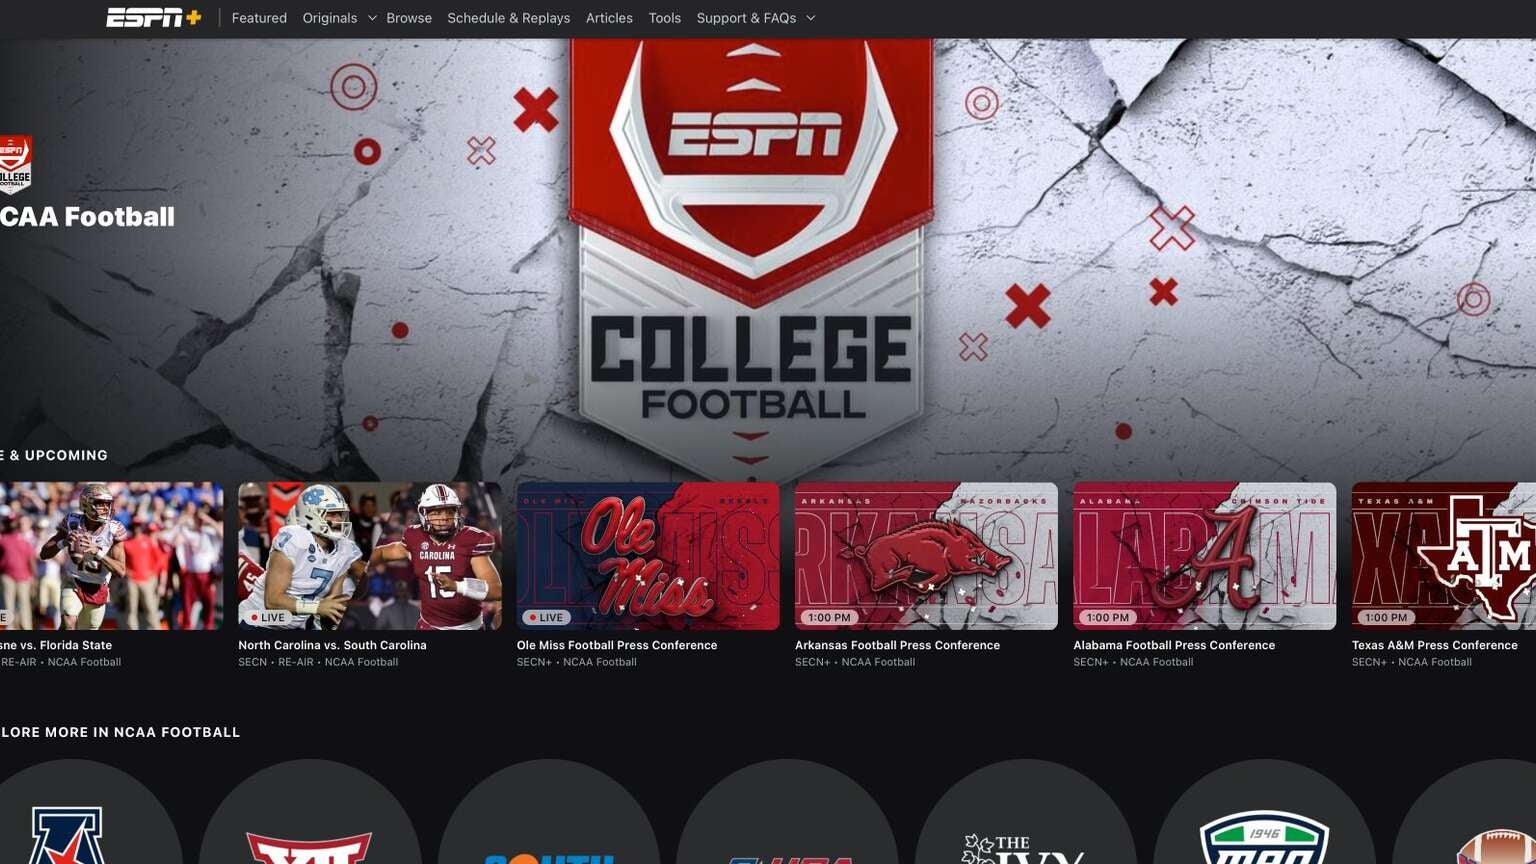 Want to Stream College Football in 2022? This is Why You Need to Sign Up for ESPN+